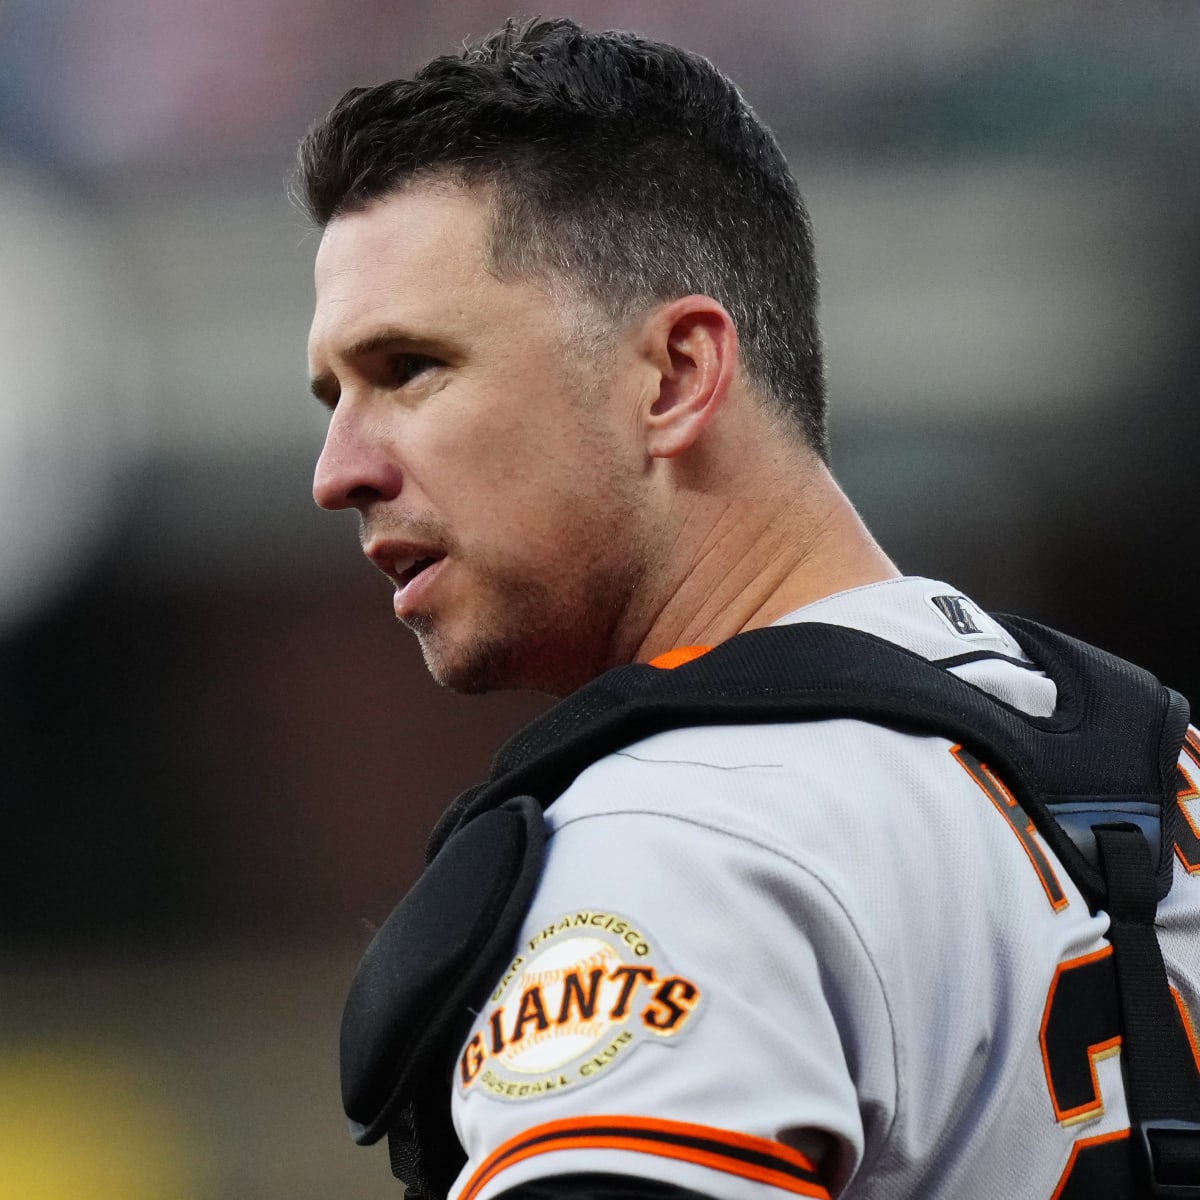 MLB Best: Is Buster Posey Still the Best Catcher in the majors? - Page 2